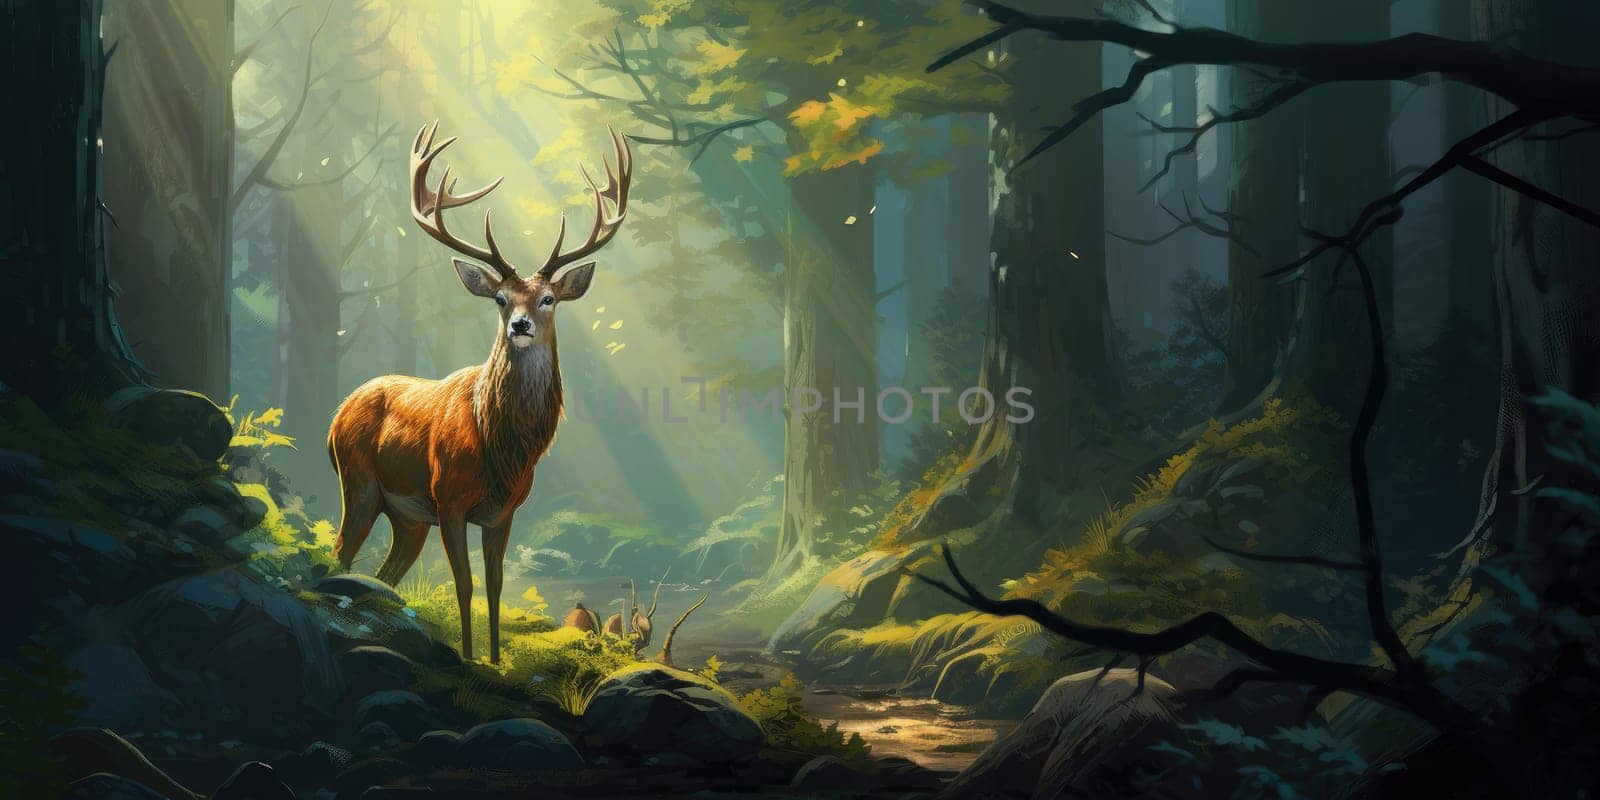 Deer in the nature, a hoofed grazing or browsing animal, with branched bony antlers that are shed annually and typically borne only by the male by Kadula